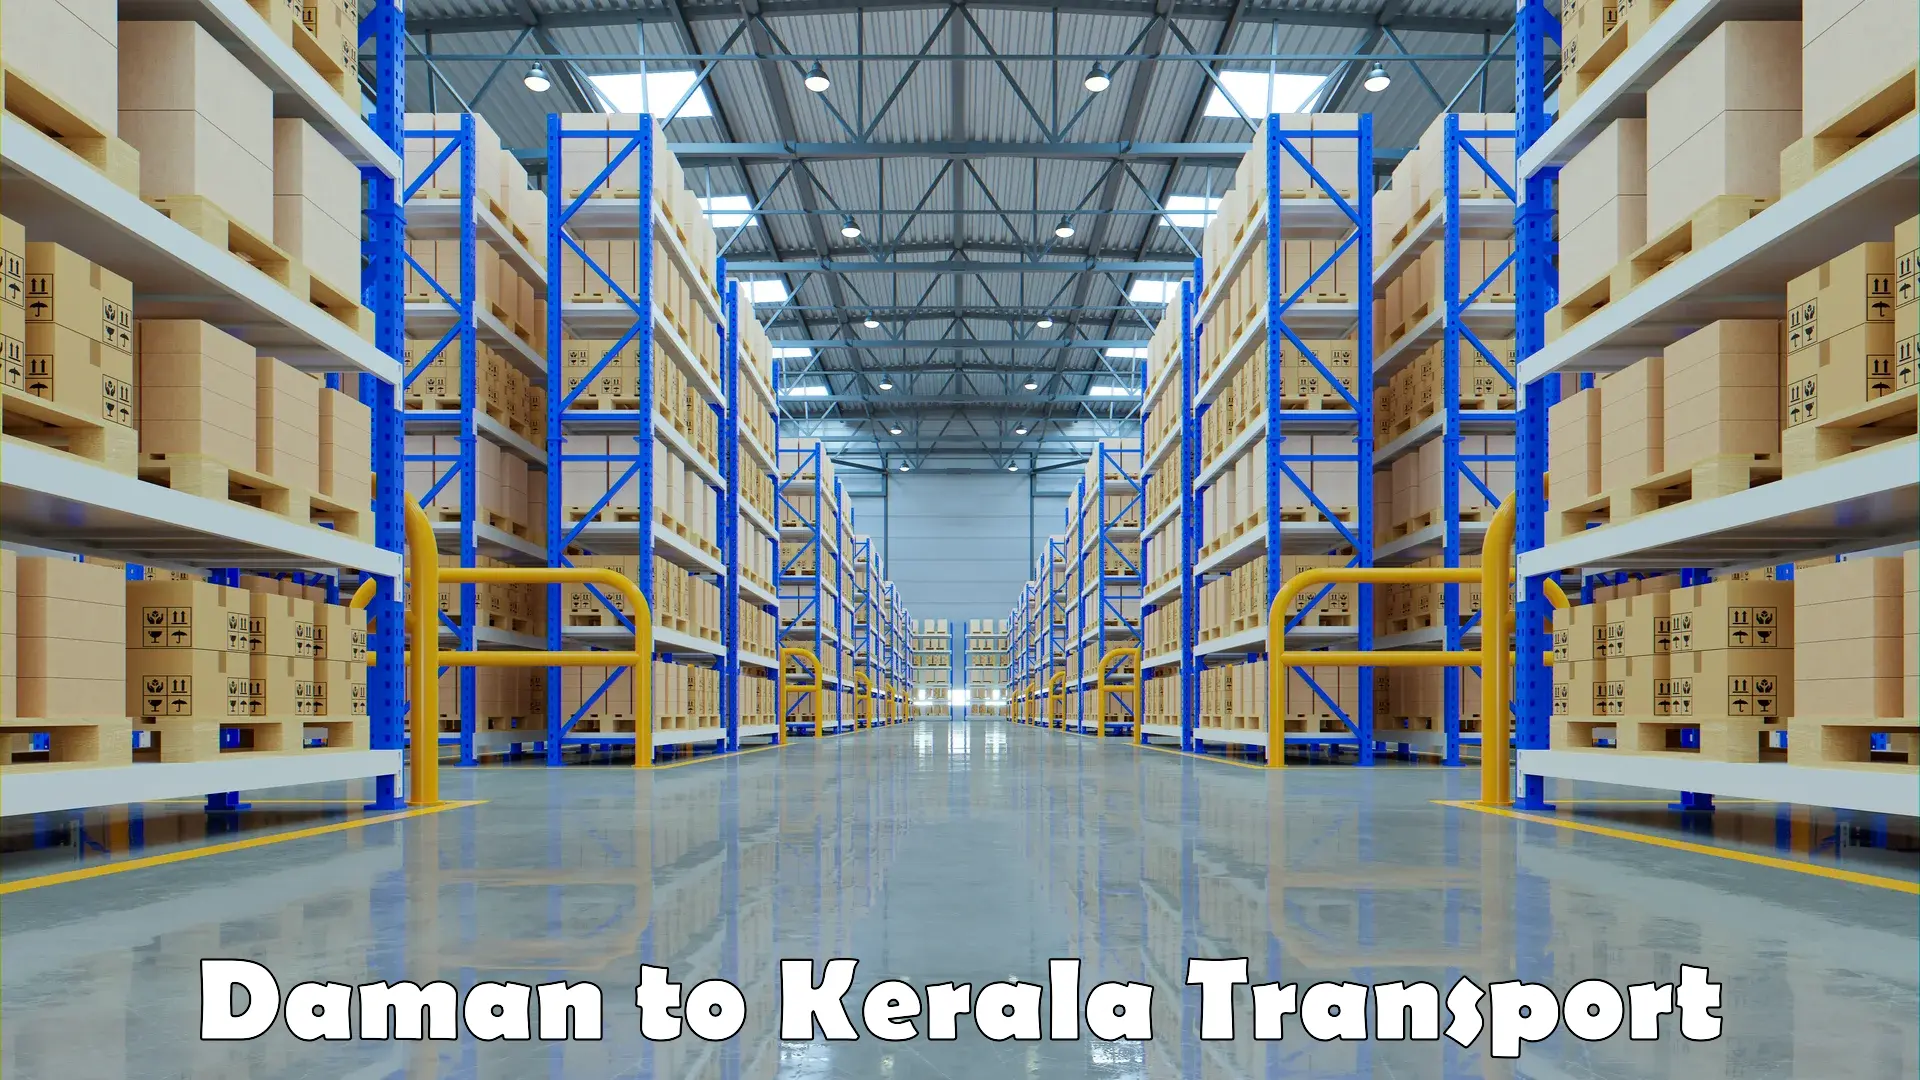 Delivery service Daman to Kerala